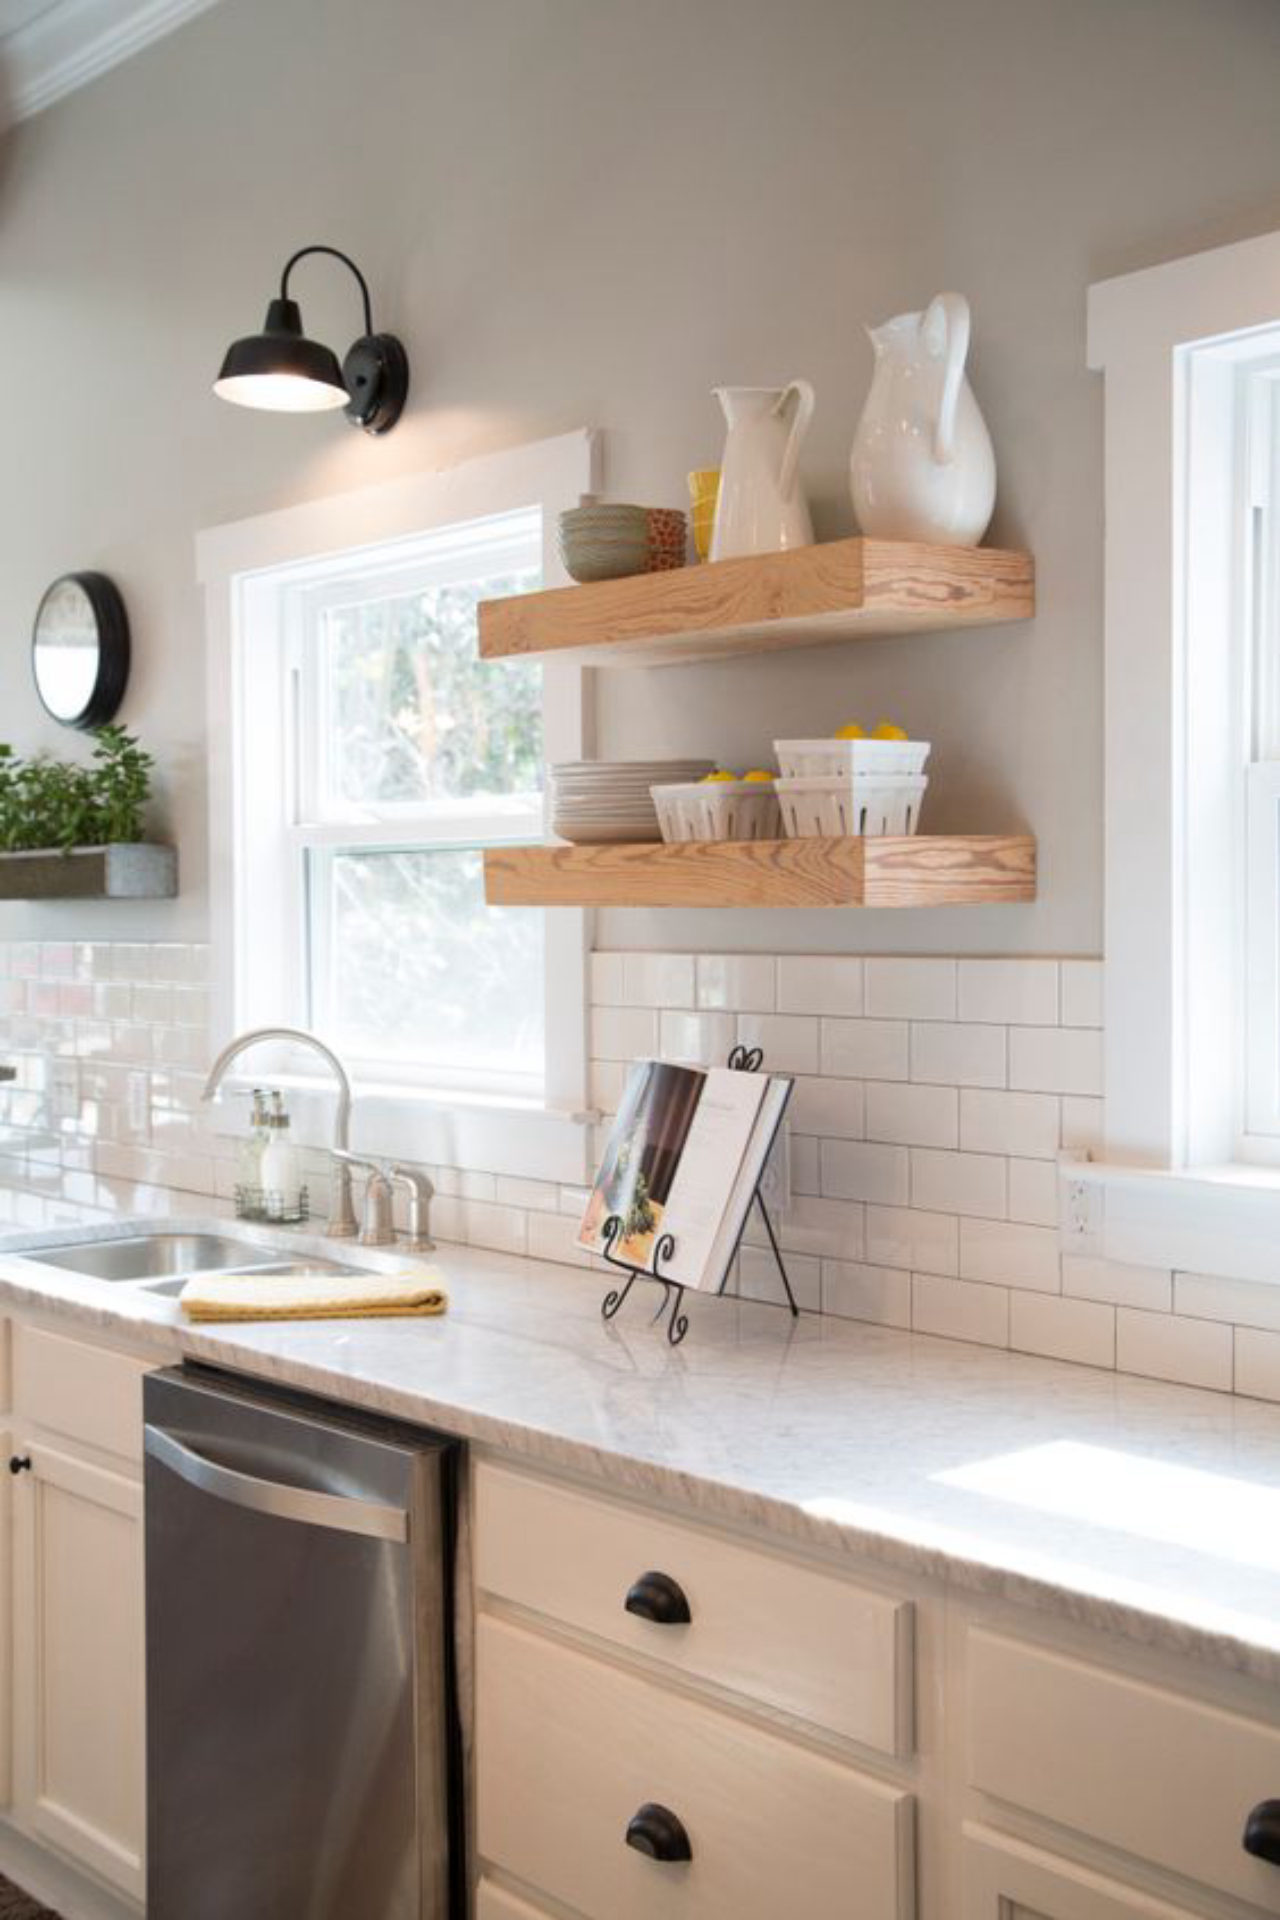 Fixer Upper Hosts Chip and Joanna Gaines have gutted and transformed the kitchen.  They added new Carrera marble countertops, cabinets, floating wood shelves, a subway tile backsplash, and fresh light gray paint.  Stainless appliances and  a stainless sink and faucet are clean and modern, as seen on HGTV's Fixer Upper.  (After 11a)  Afters